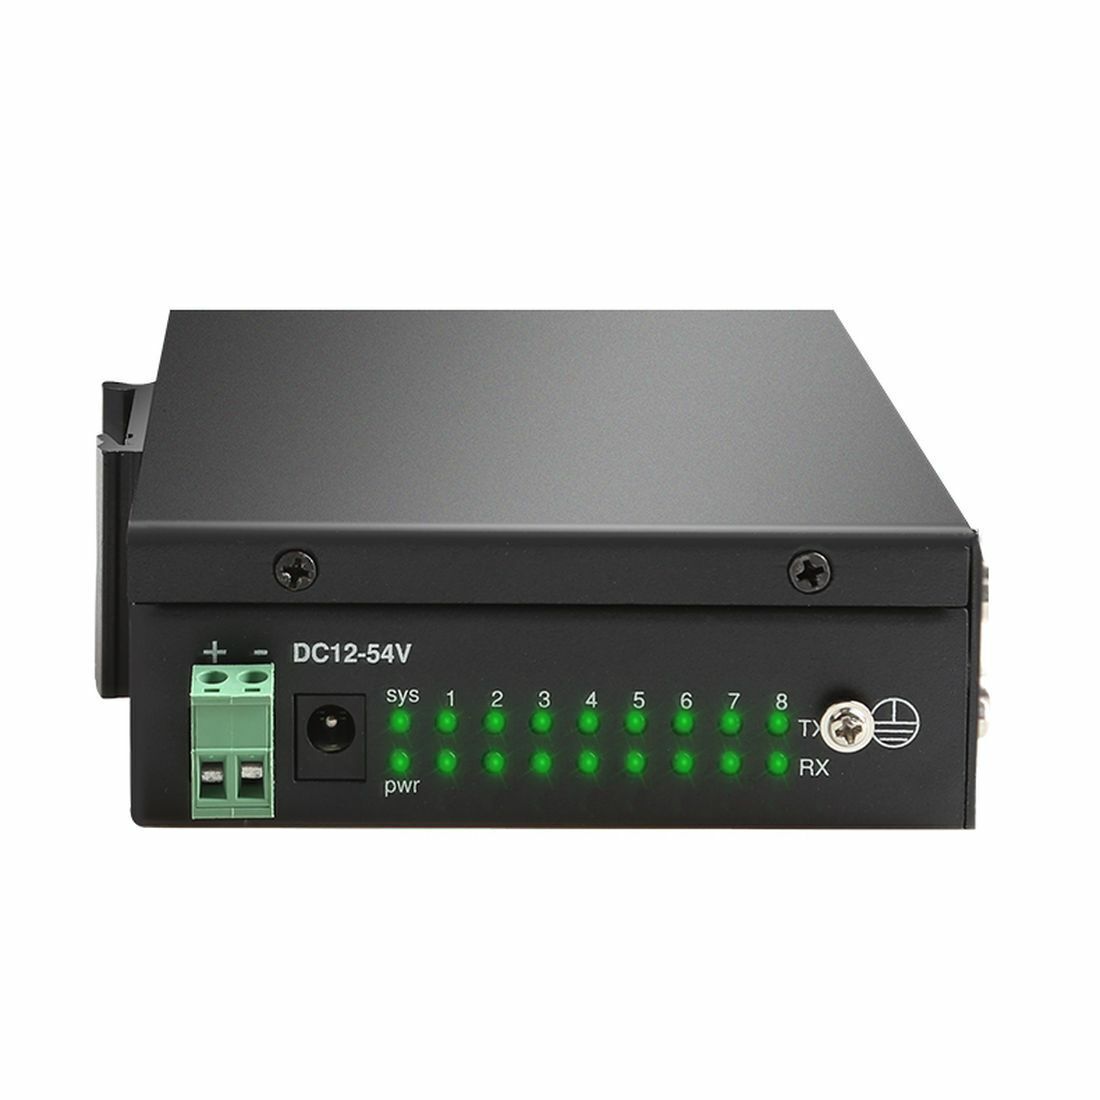 DIEWU 8-port RS232 RS485 RS422 to Ethernet TCP/IP Converter Serial Device Server